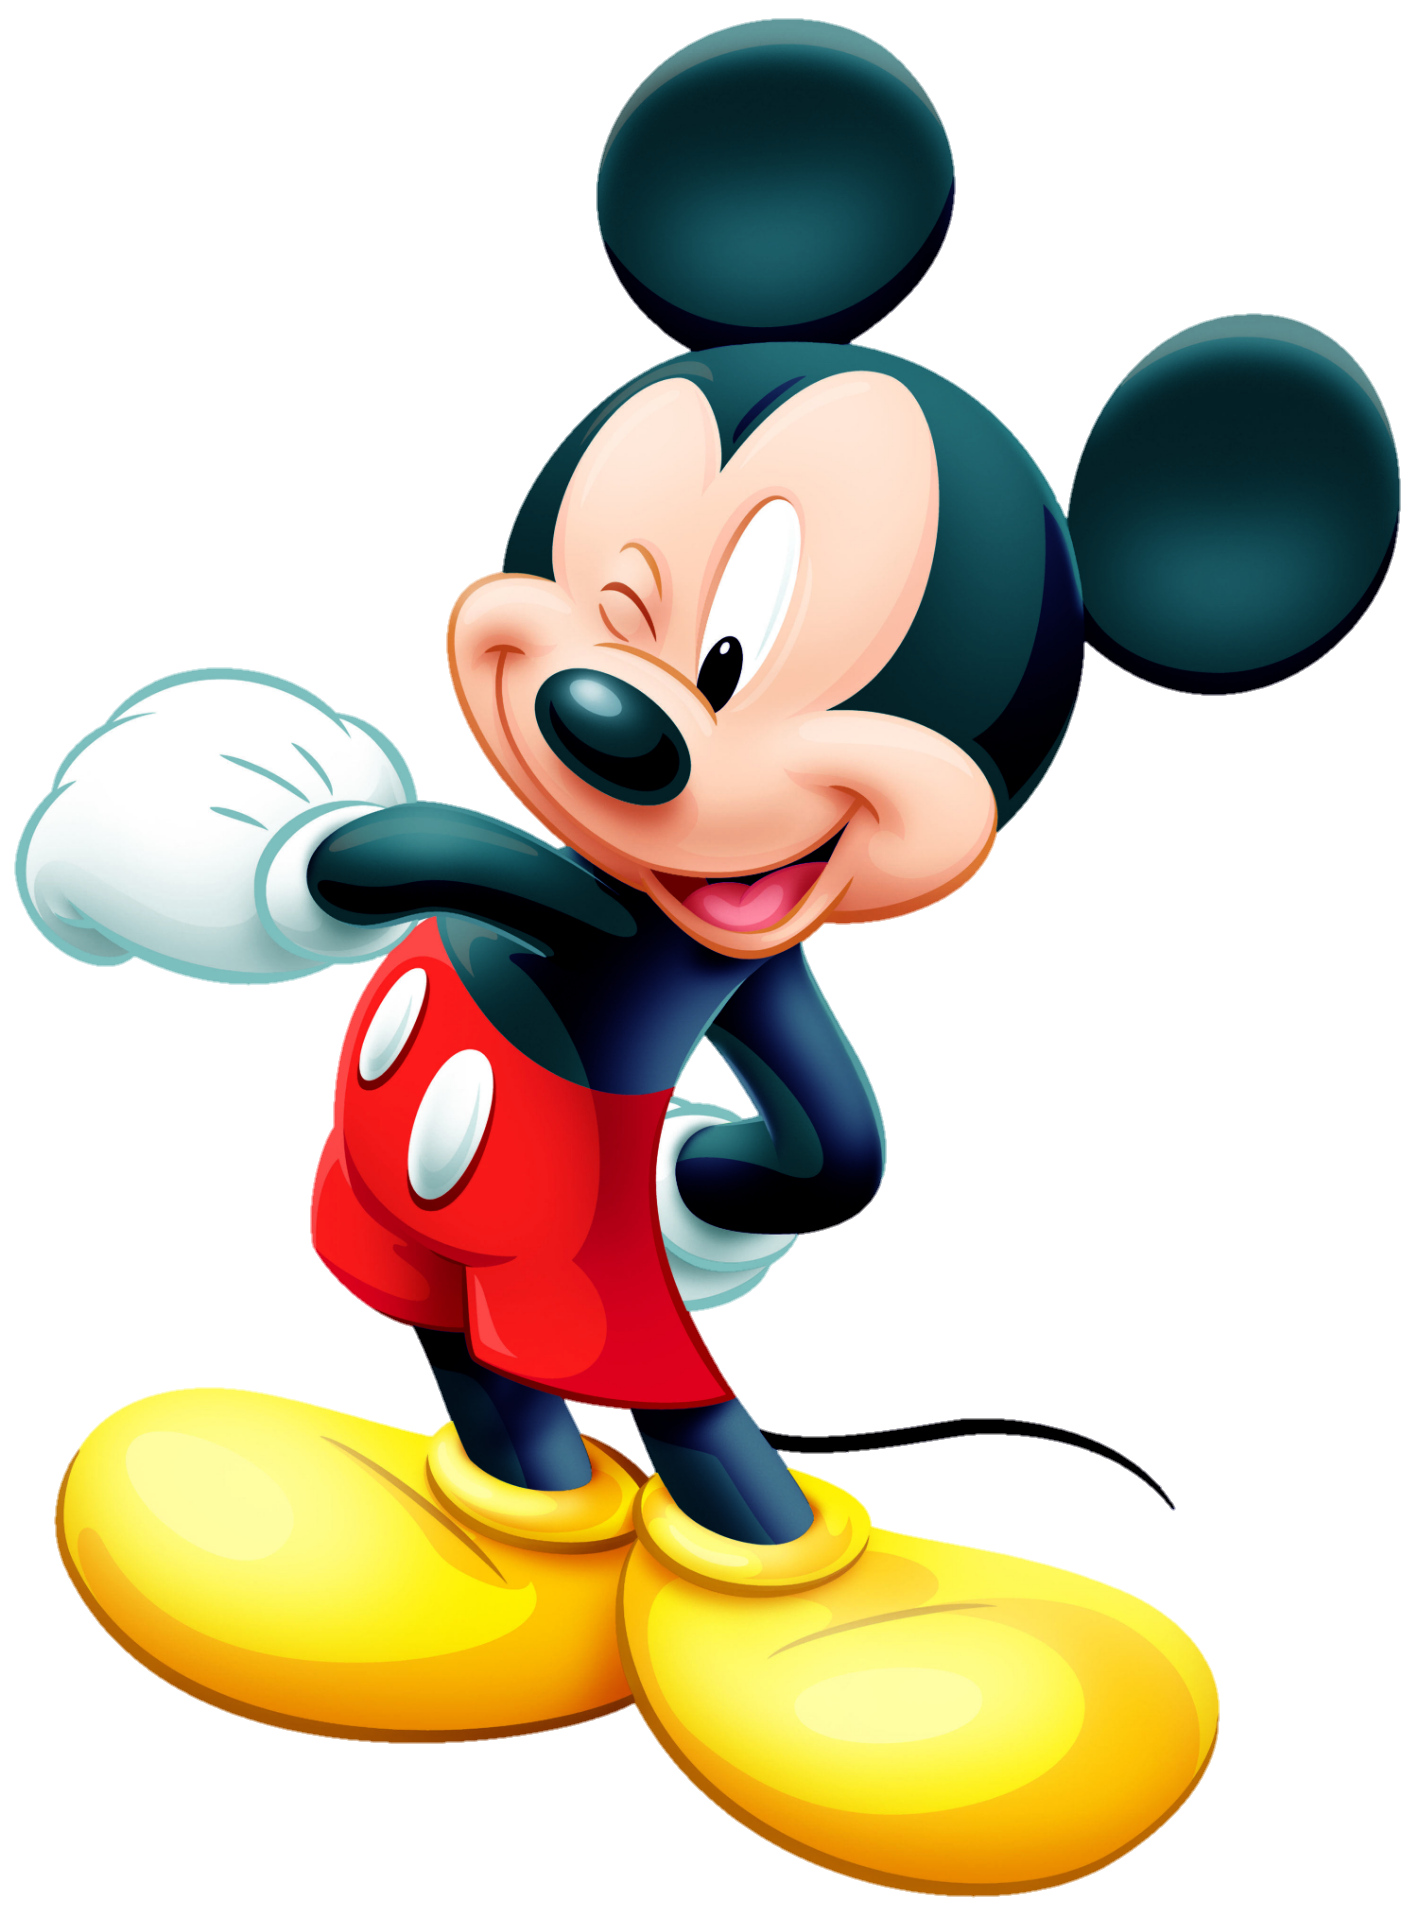 mickey-mouse-png-from-pngfre-8